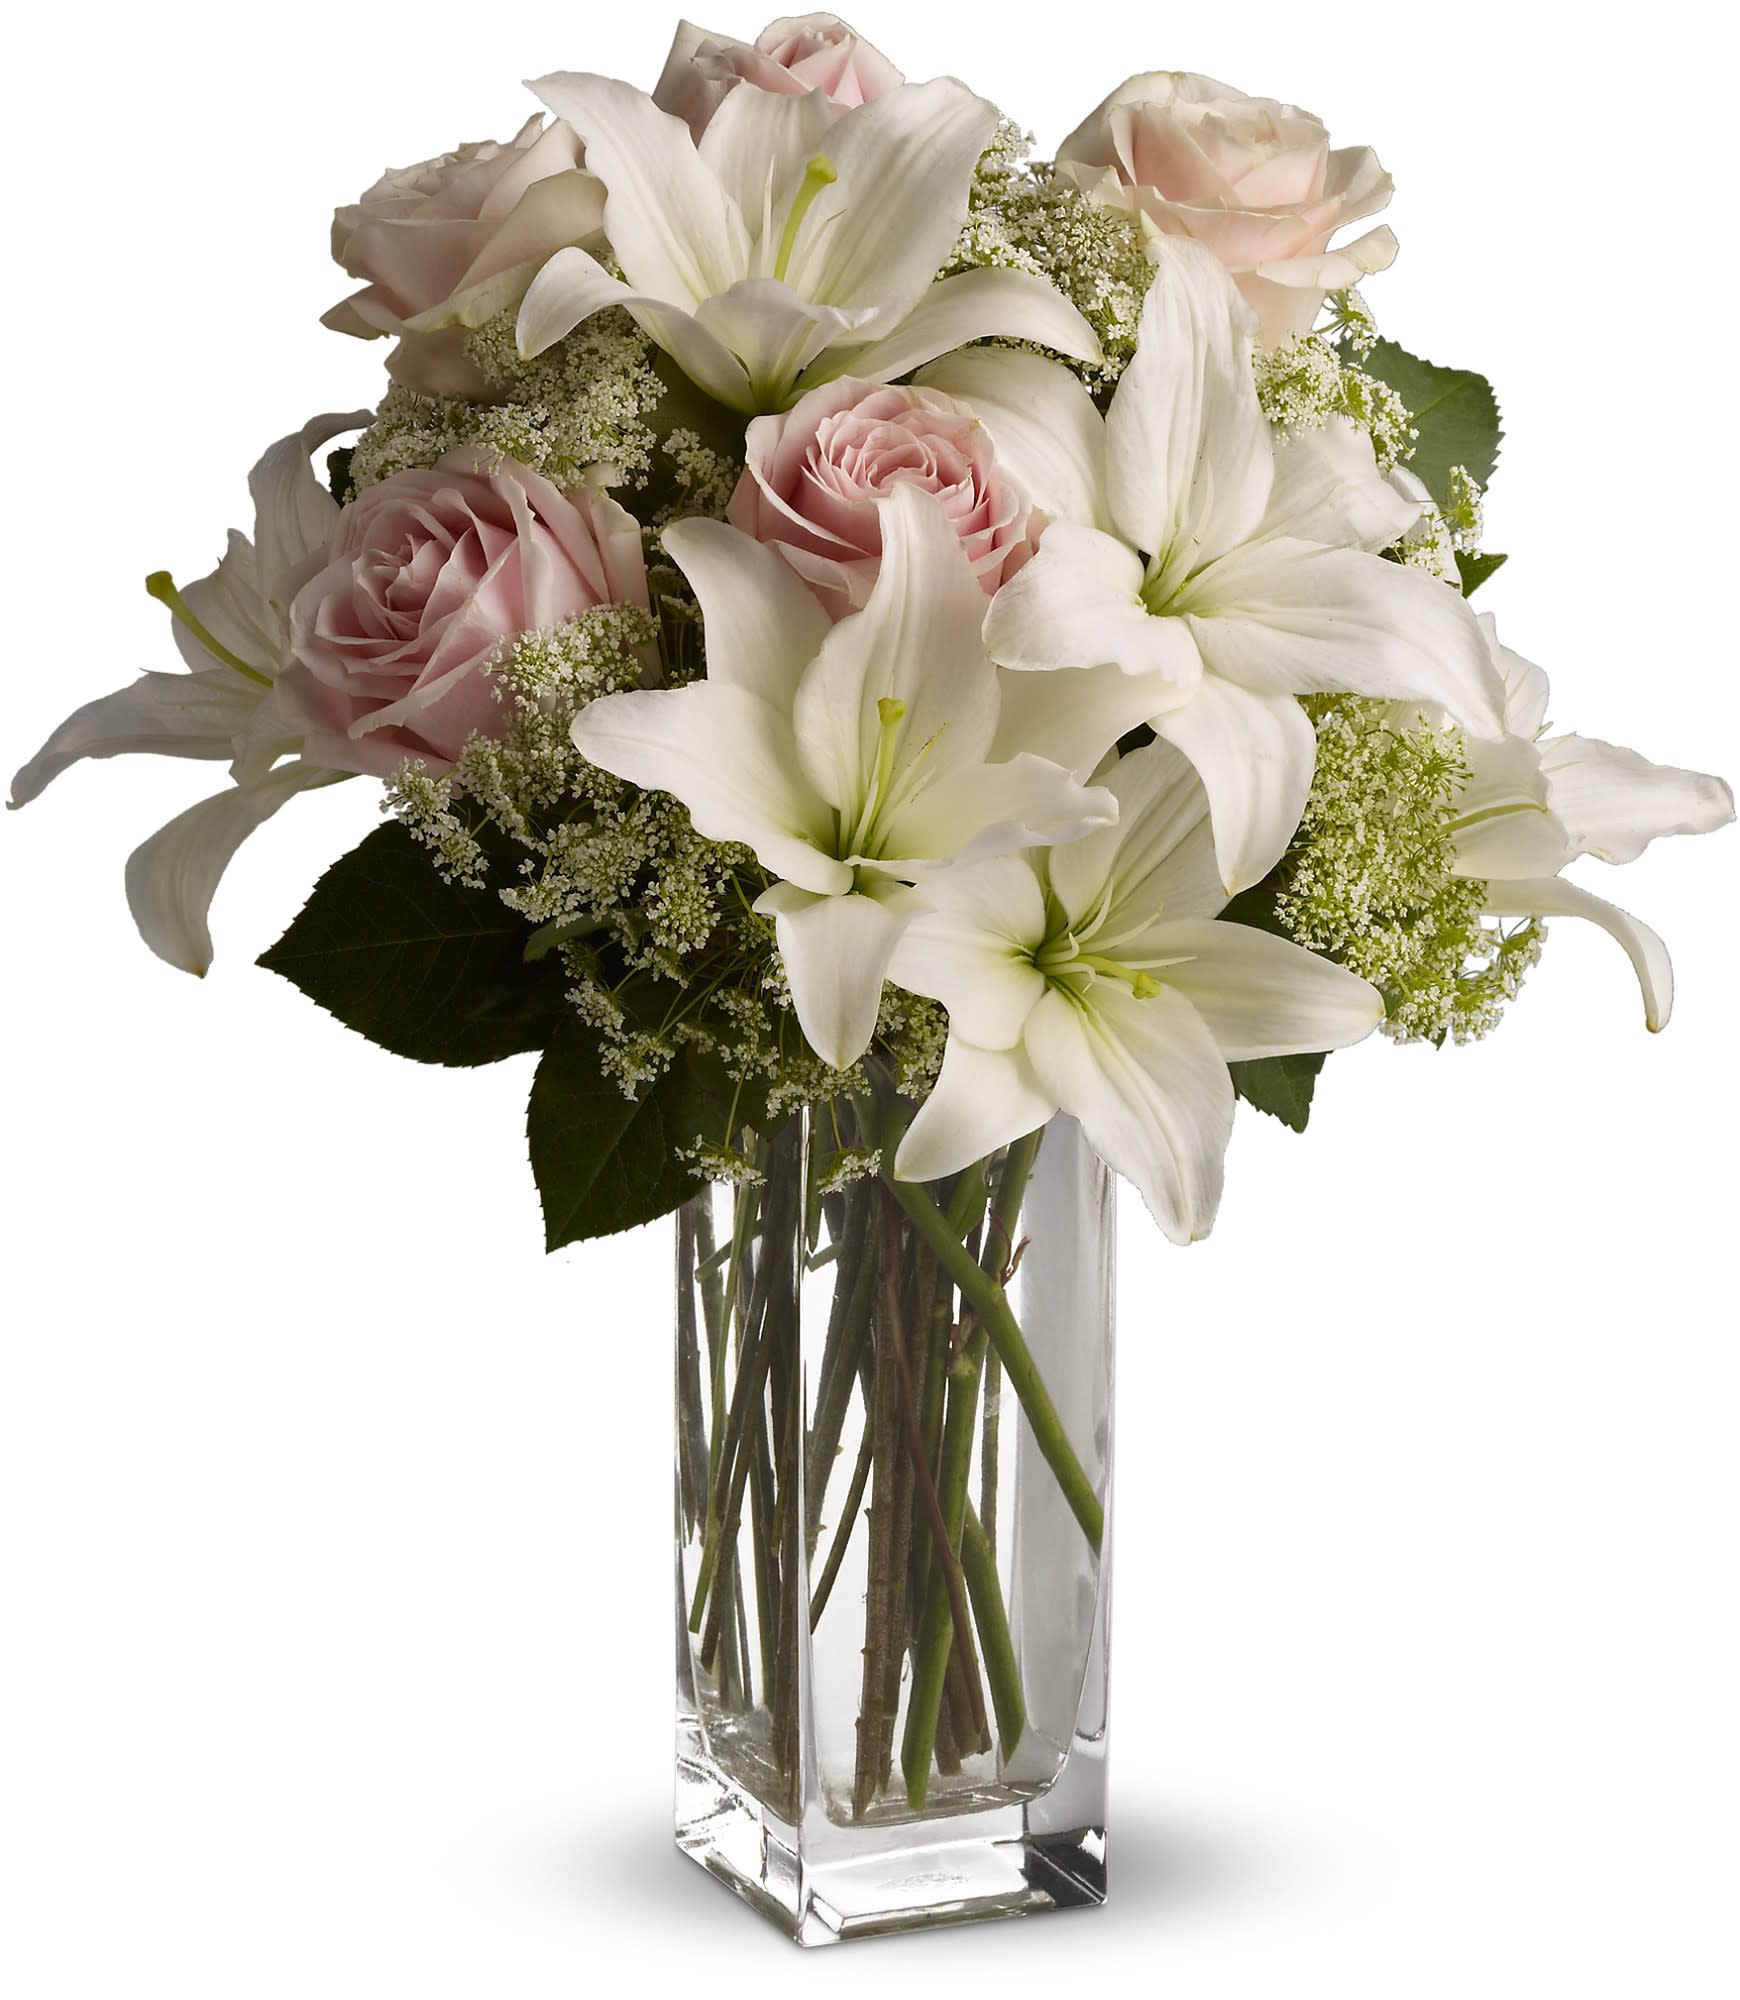 Teleflora's Heavenly and Harmony - Heavenly hues and pretty petals are in perfect harmony in this gorgeous arrangement. Lovely for a birthday, anniversary or just because, it's simply stunning! ***Available in other colors- please call to discuss! Clear vase may vary 